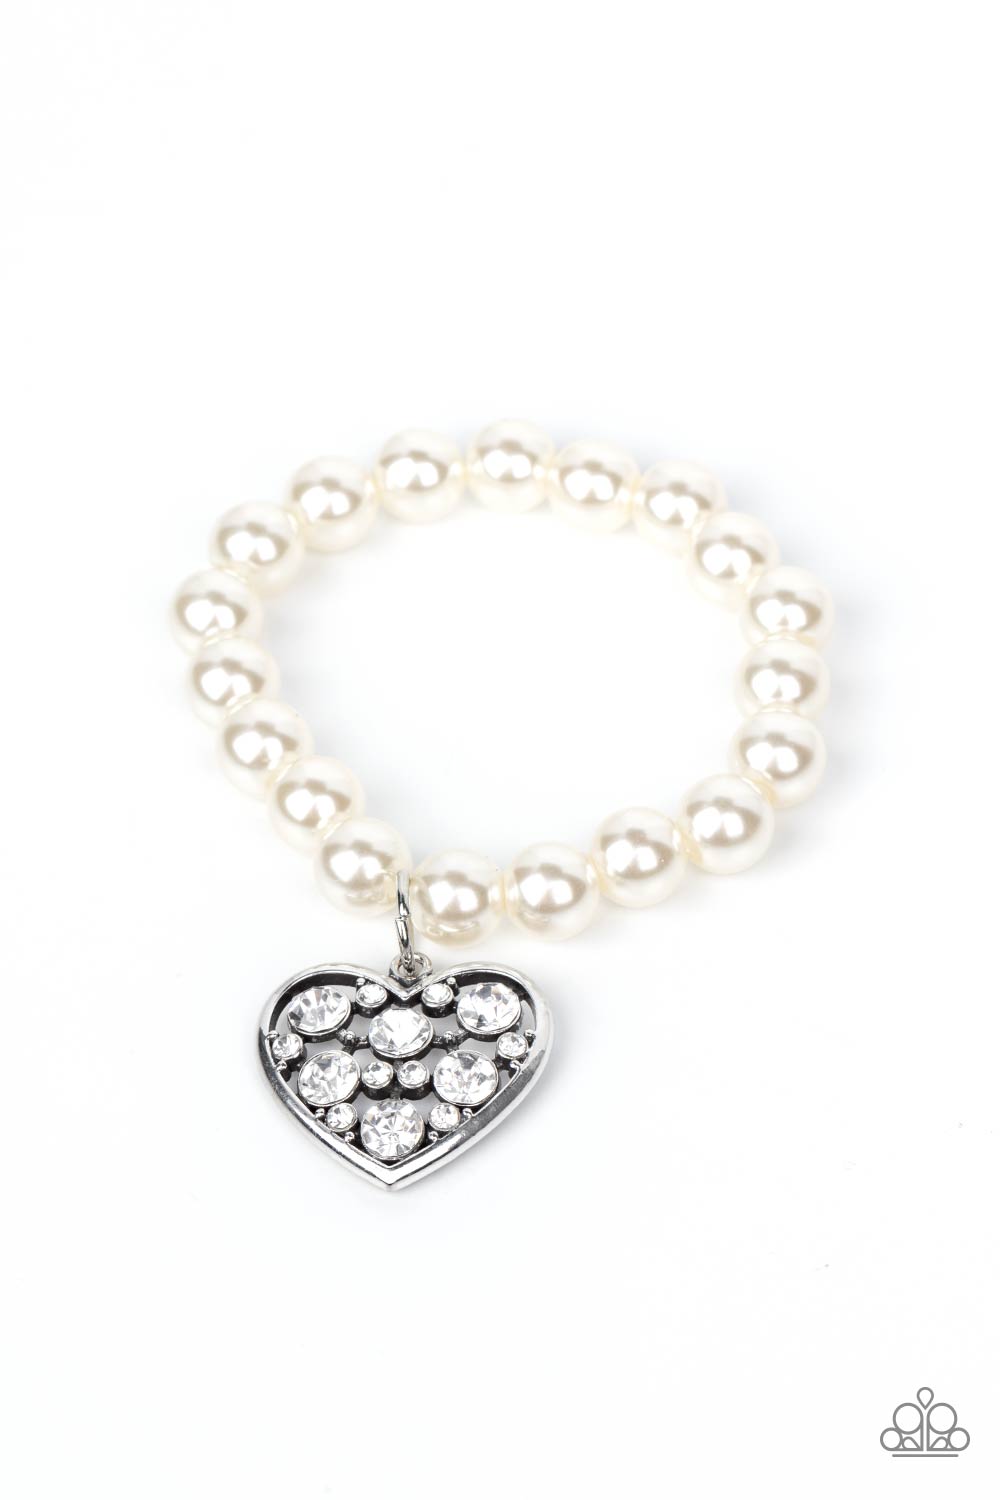 Cutely Crushing White Pearl and Rhinestone Heart Bracelet - Paparazzi Accessories - lightbox -CarasShop.com - $5 Jewelry by Cara Jewels